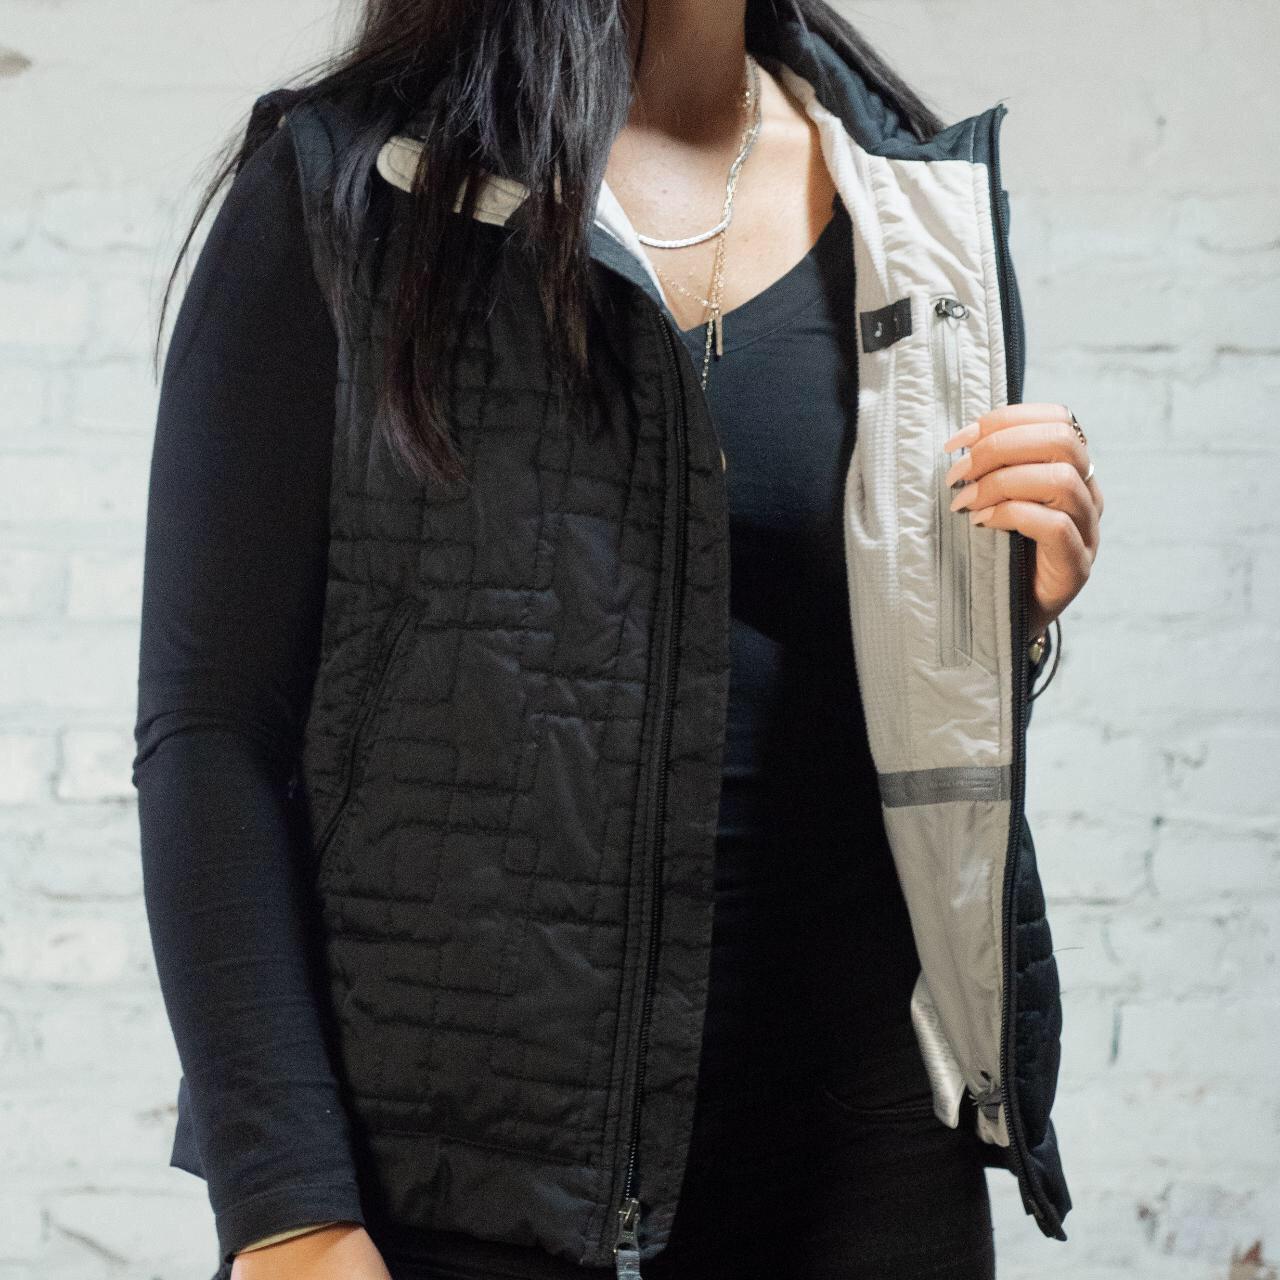 Product Image 2 - Black Nike ACG Quilted Vest

Black